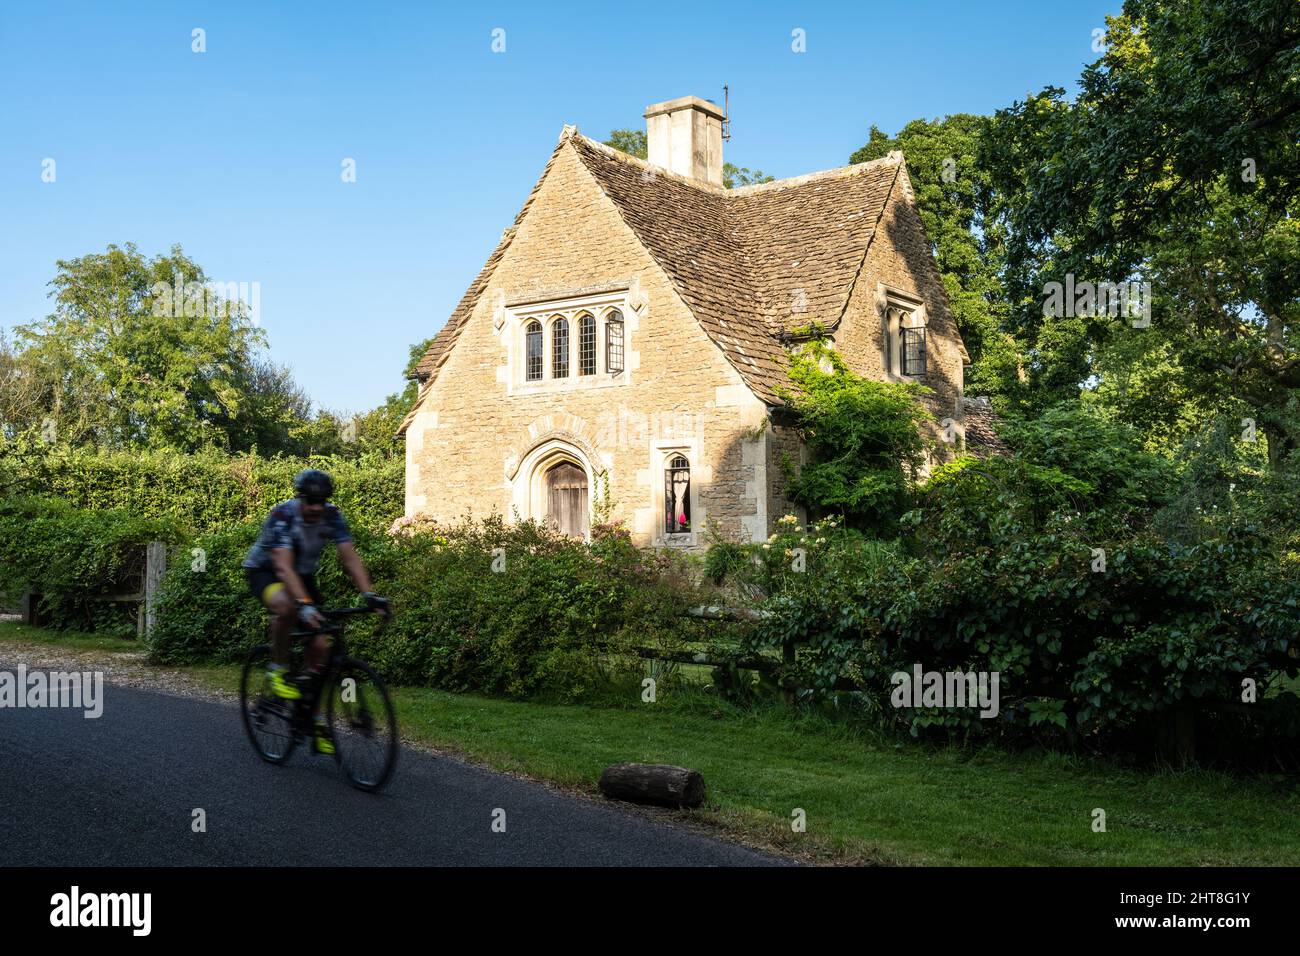 A cyclist rides past a traditional stone cottage in the Cotswolds countryside of Wiltshire, England. Stock Photo